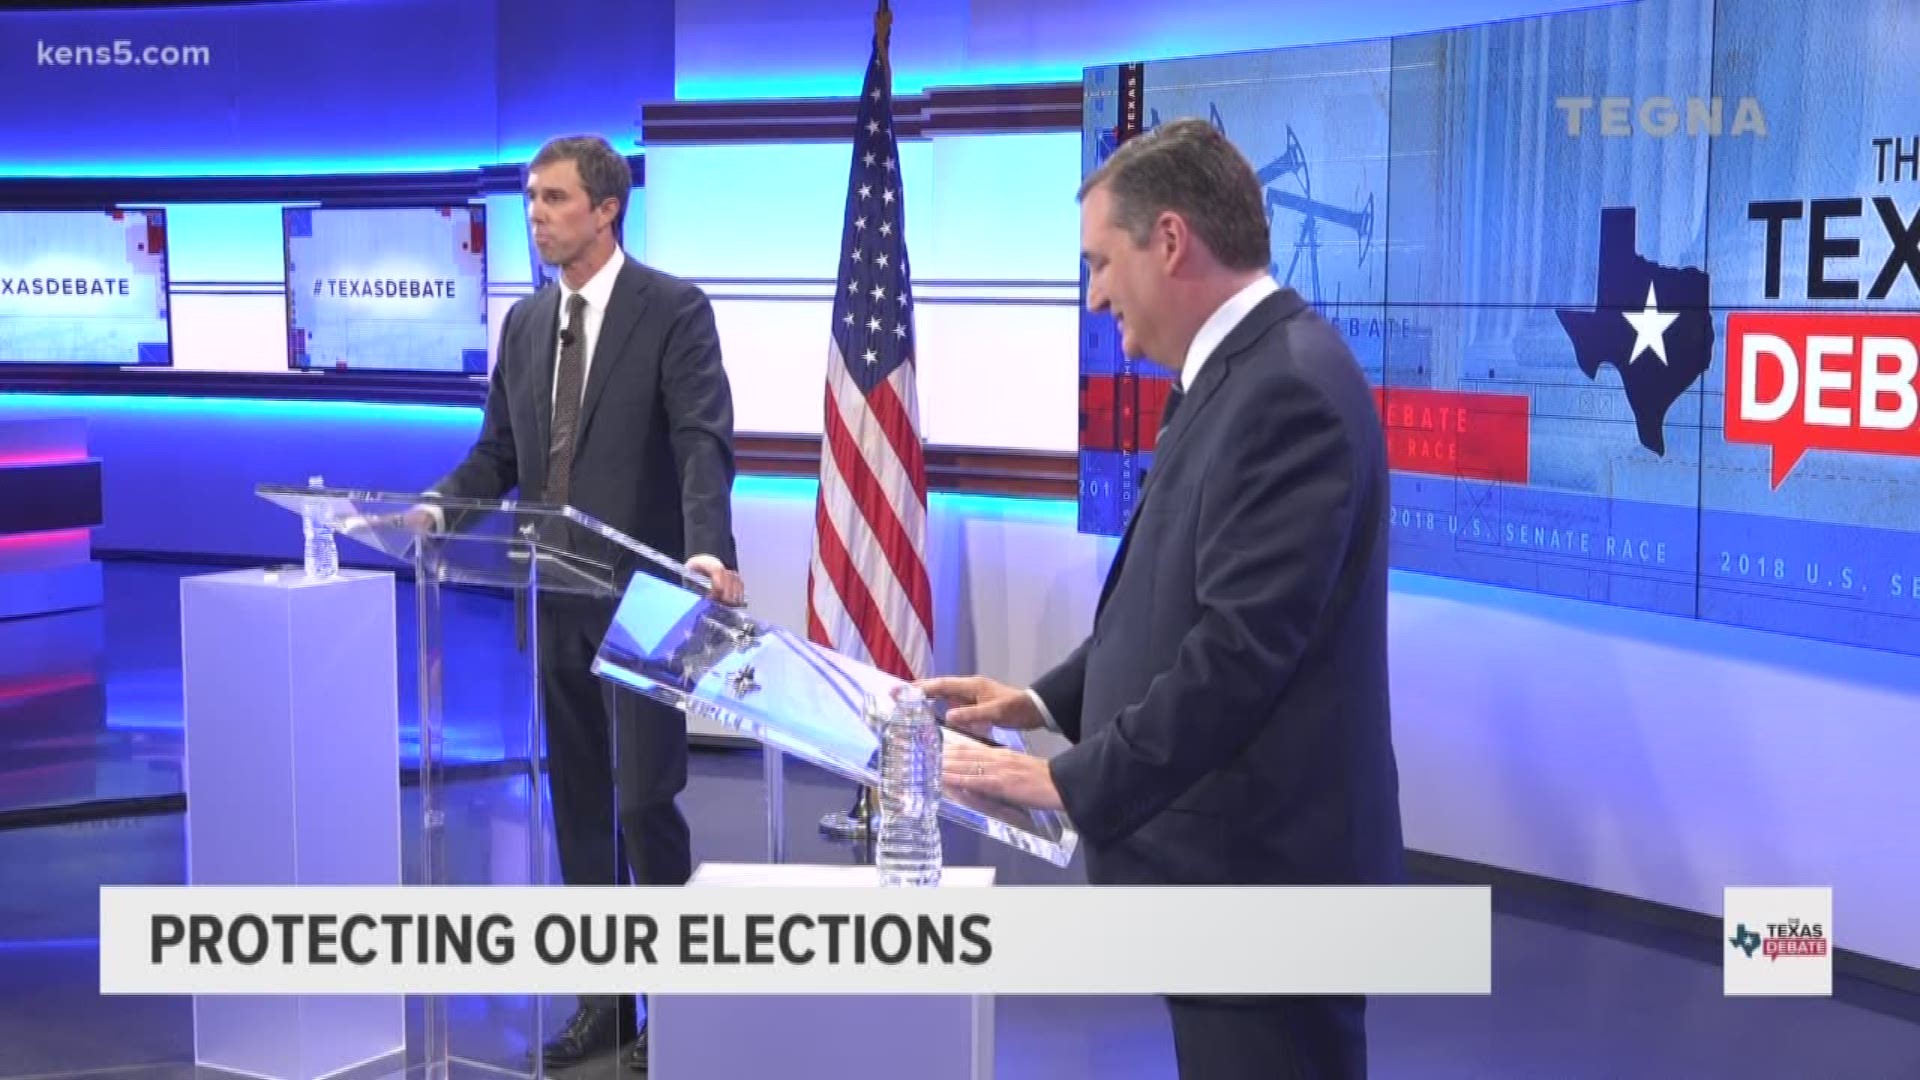 O'Rourke voices his concerns about international forces manipulating the voters' minds at the ballot box, while Cruz emphasizes the danger of social media giants and alleged political bias.